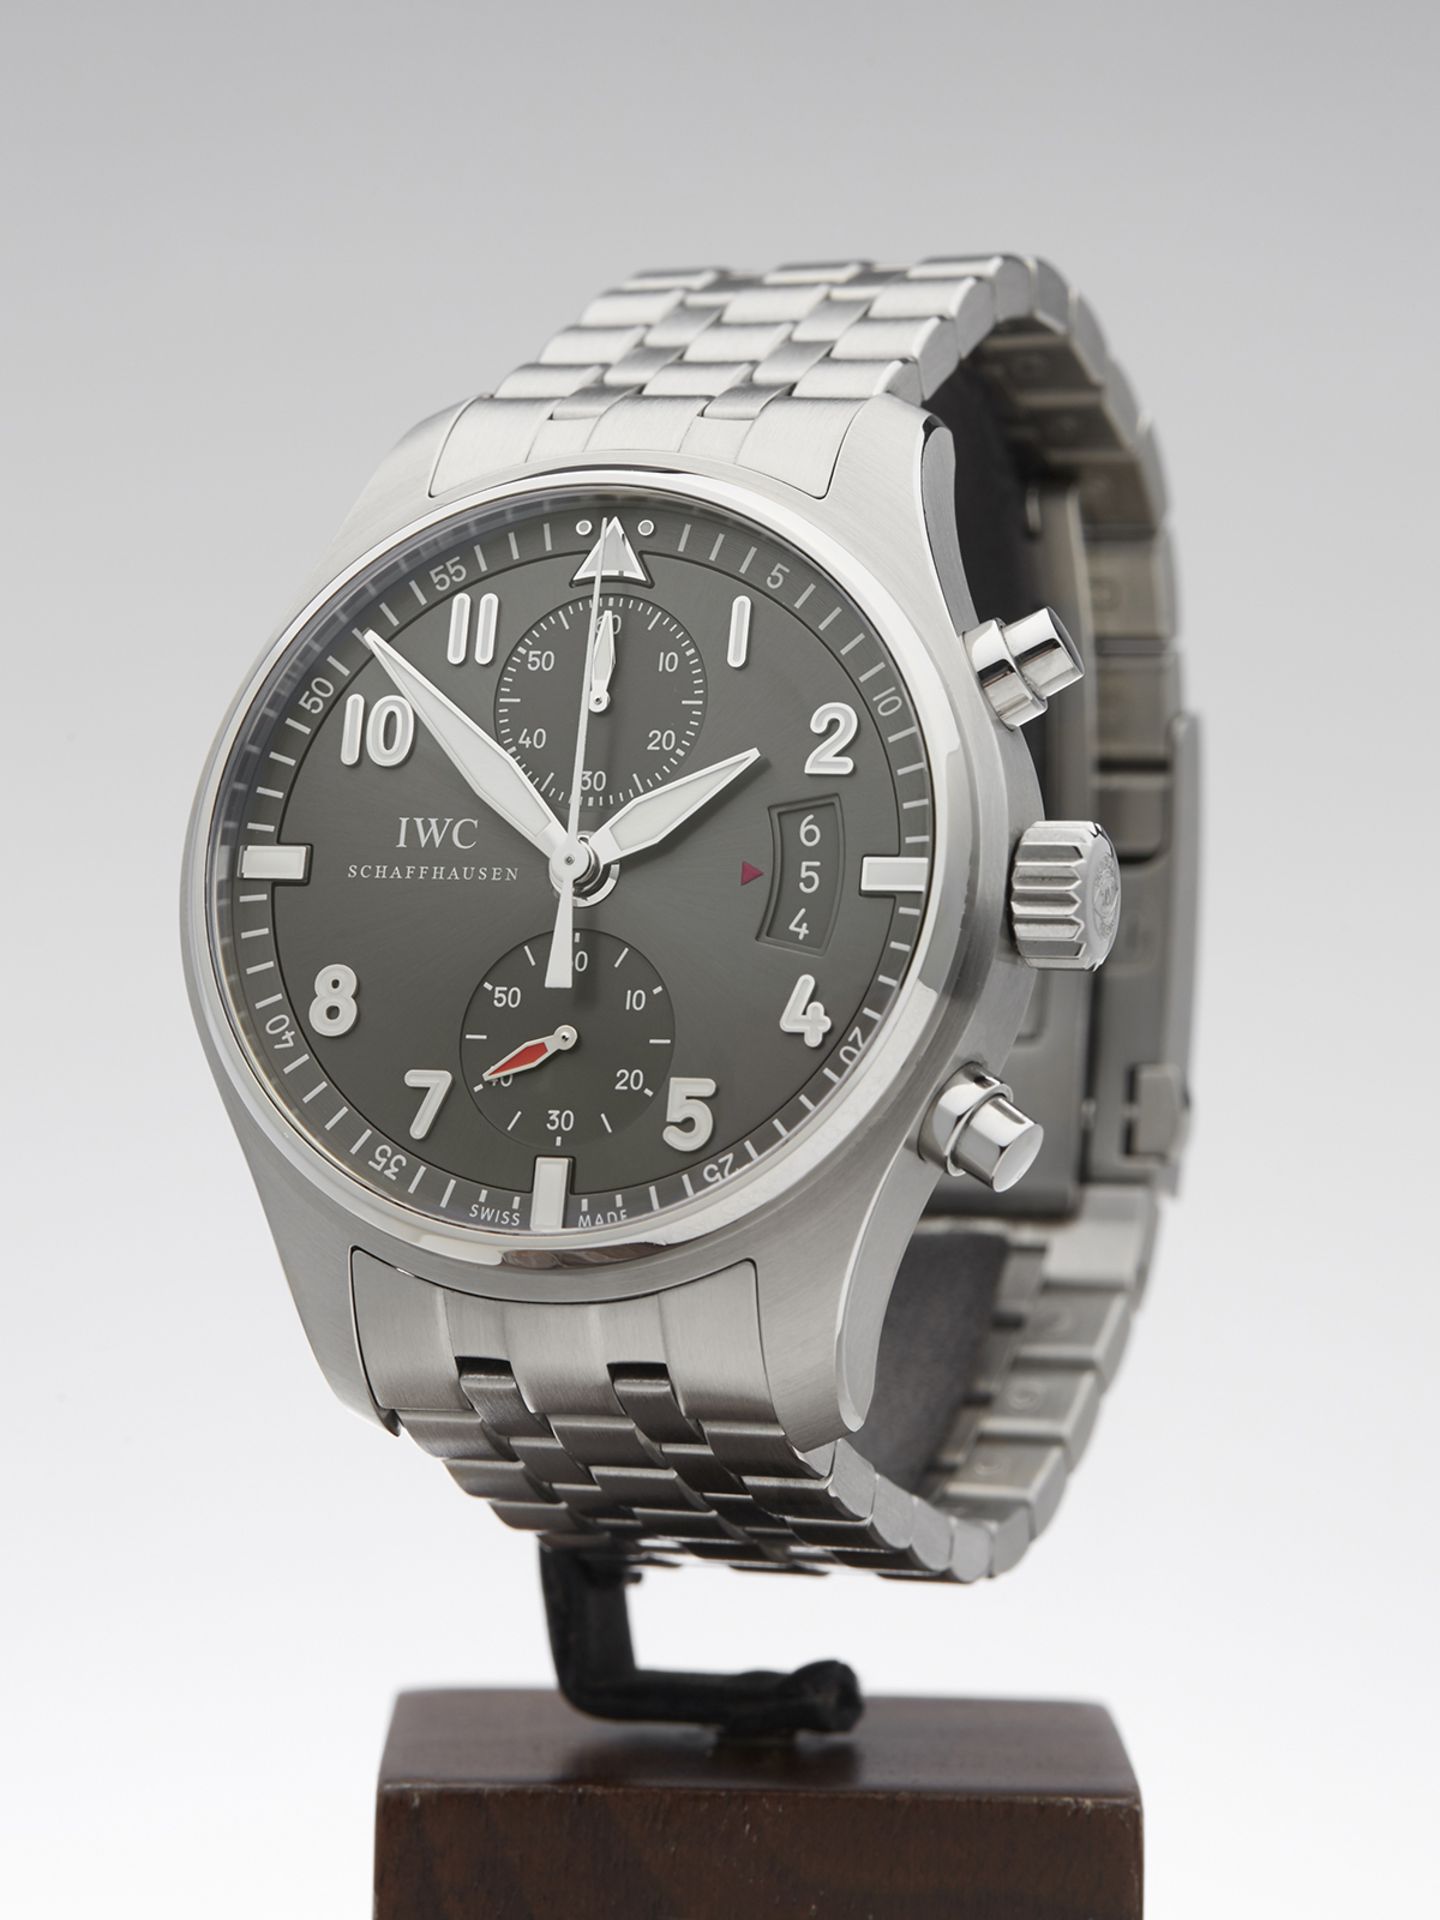 IWC Pilot's Chronograph Spitfire 43mm Stainless Steel IW387804